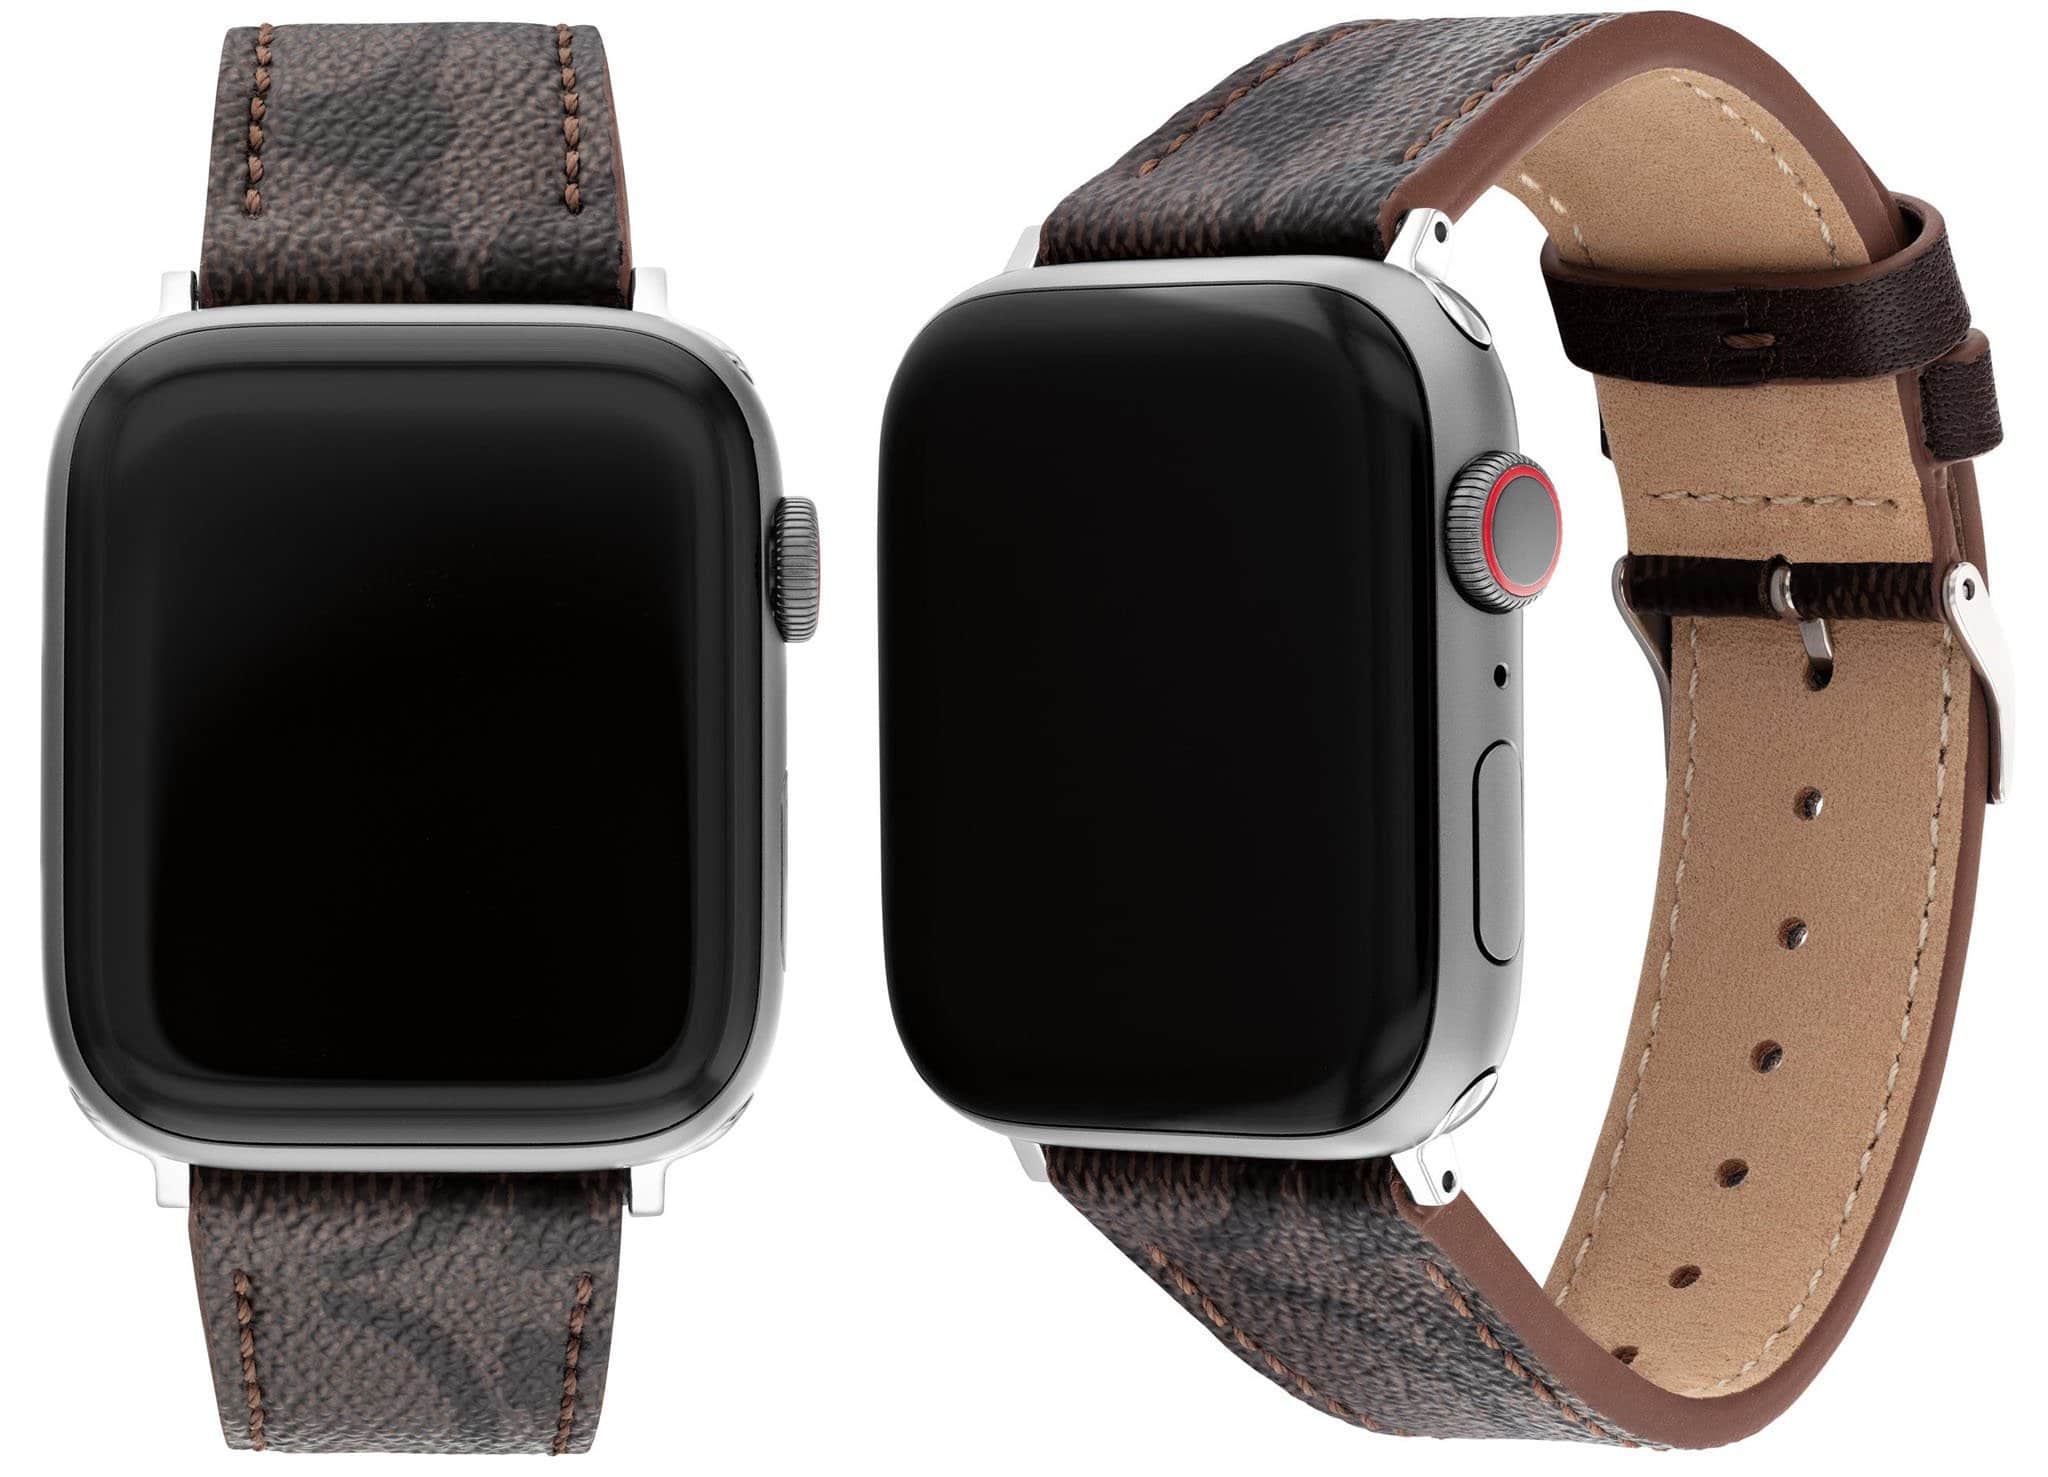 A classic design from a mid-range luxury brand, this Apple Watch strap is made with Coach's signature coated canvas